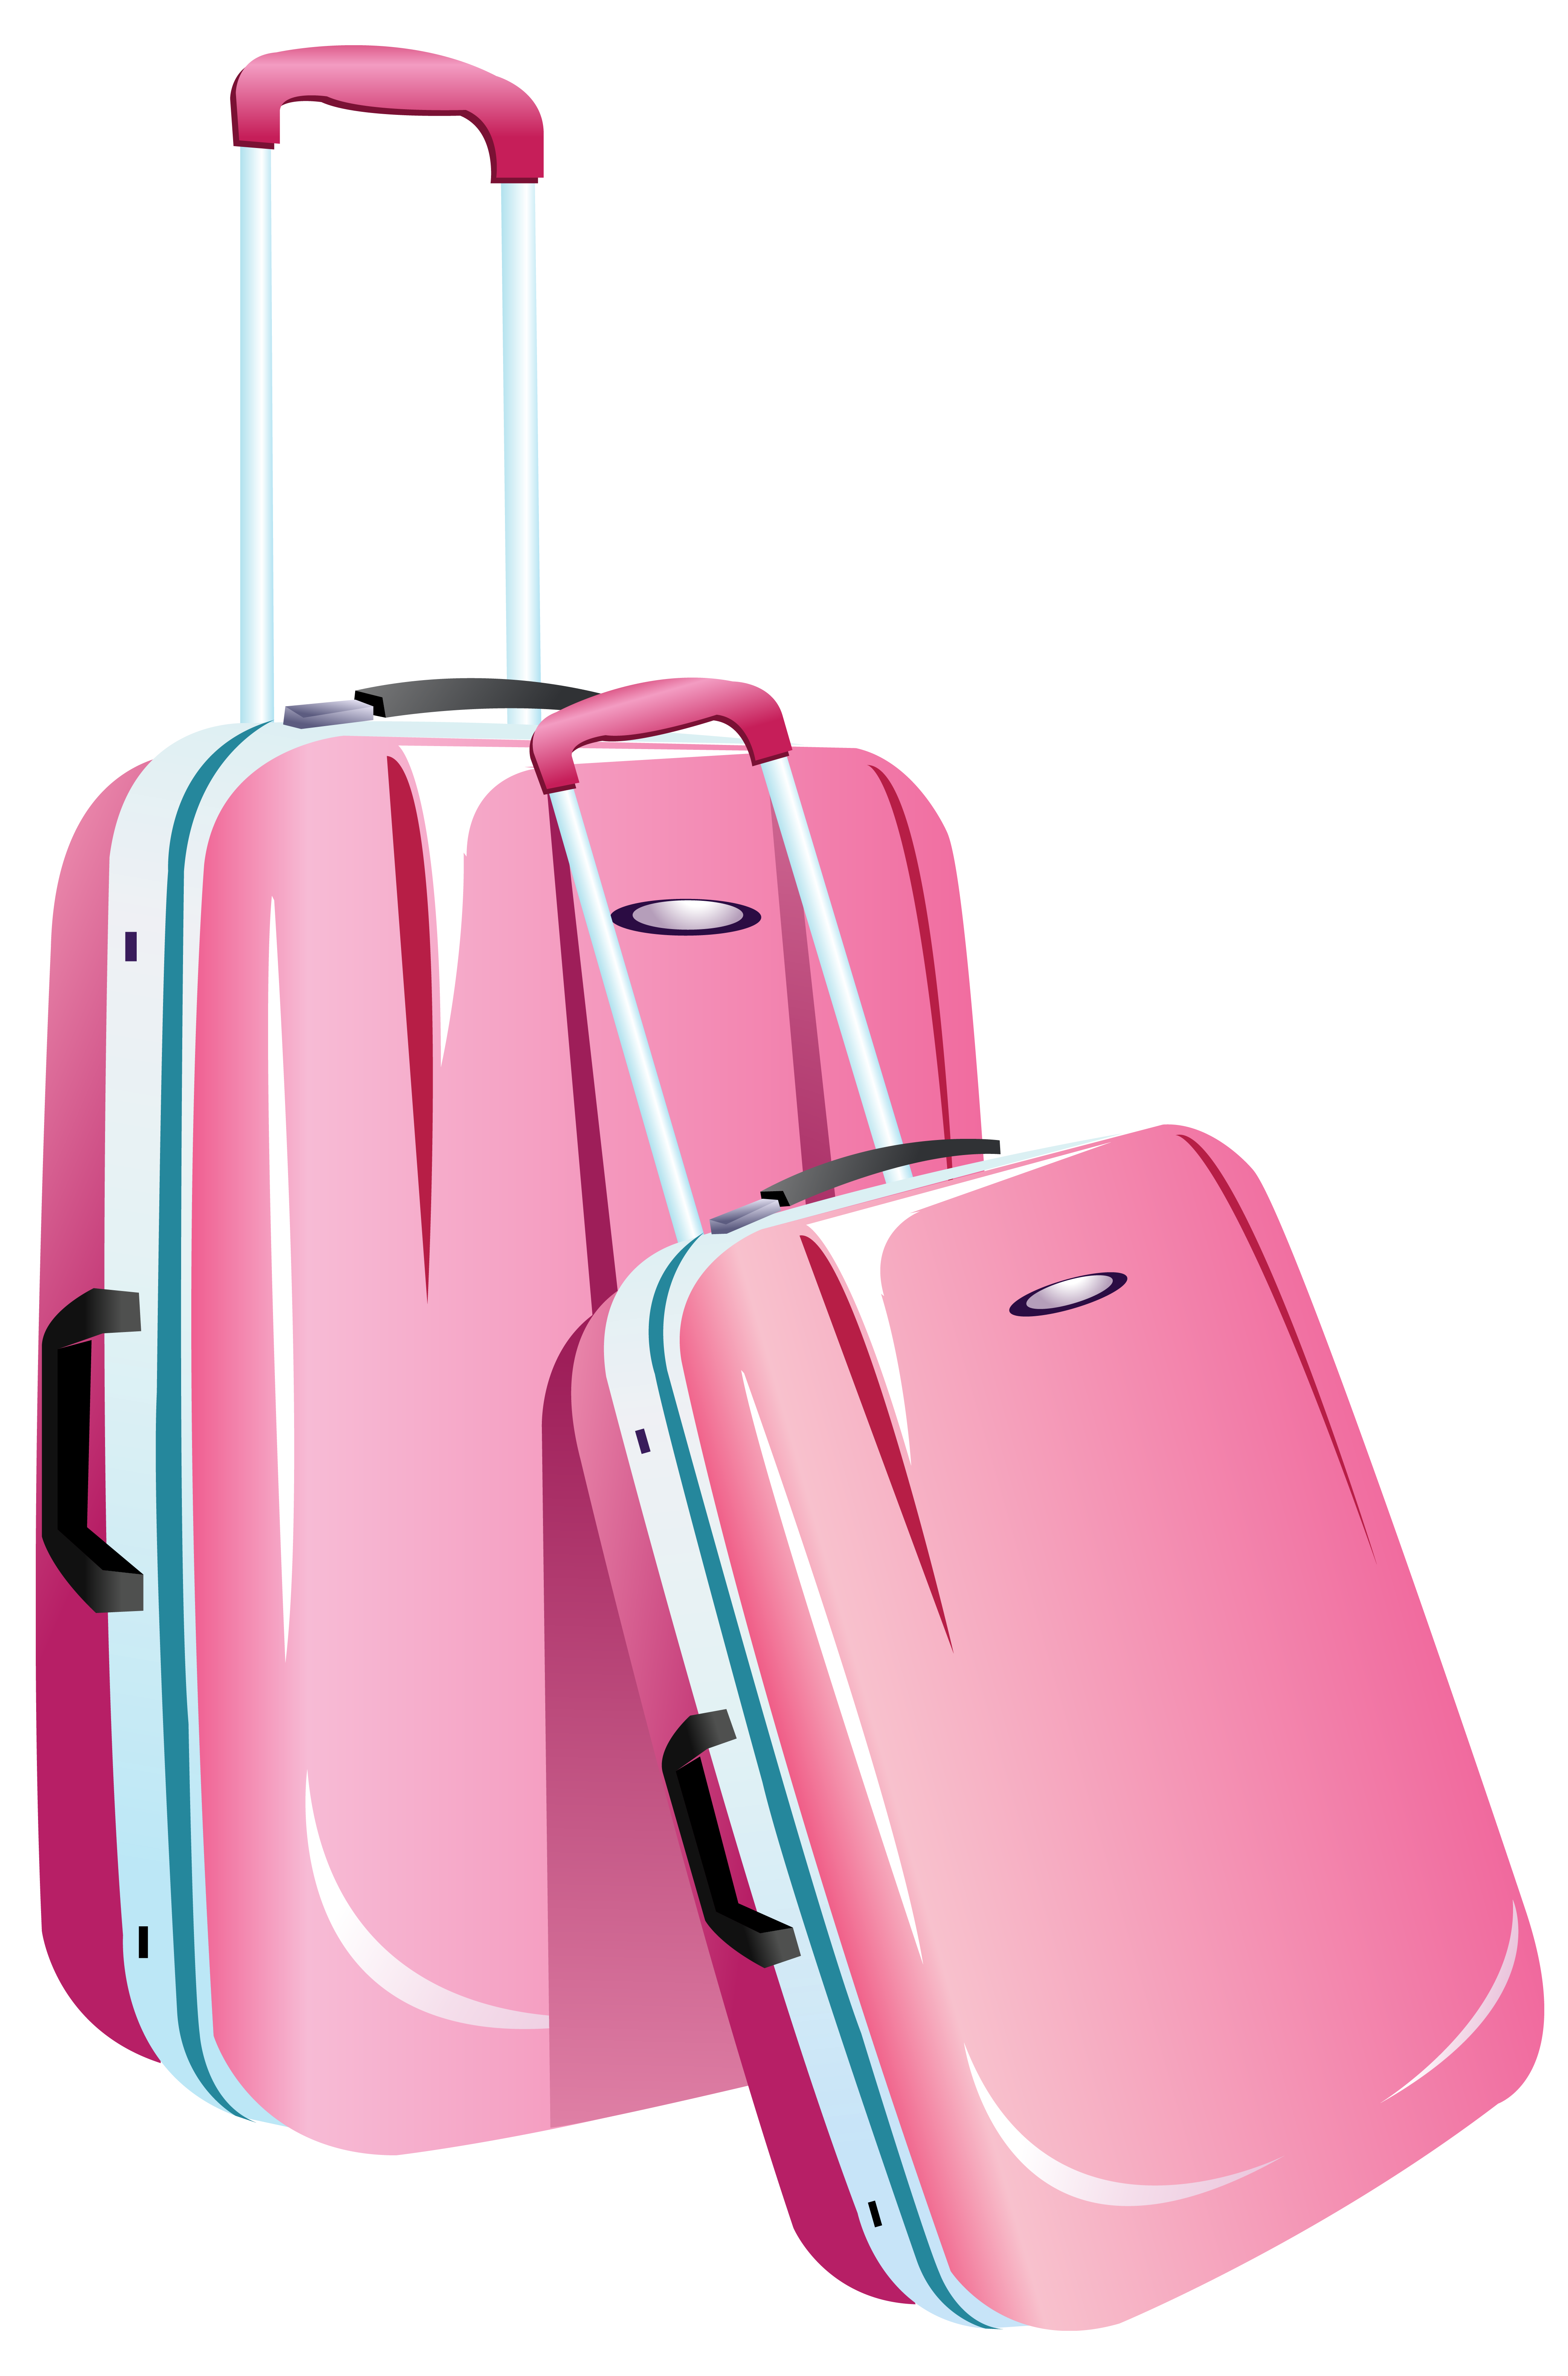 Pink travel bags.